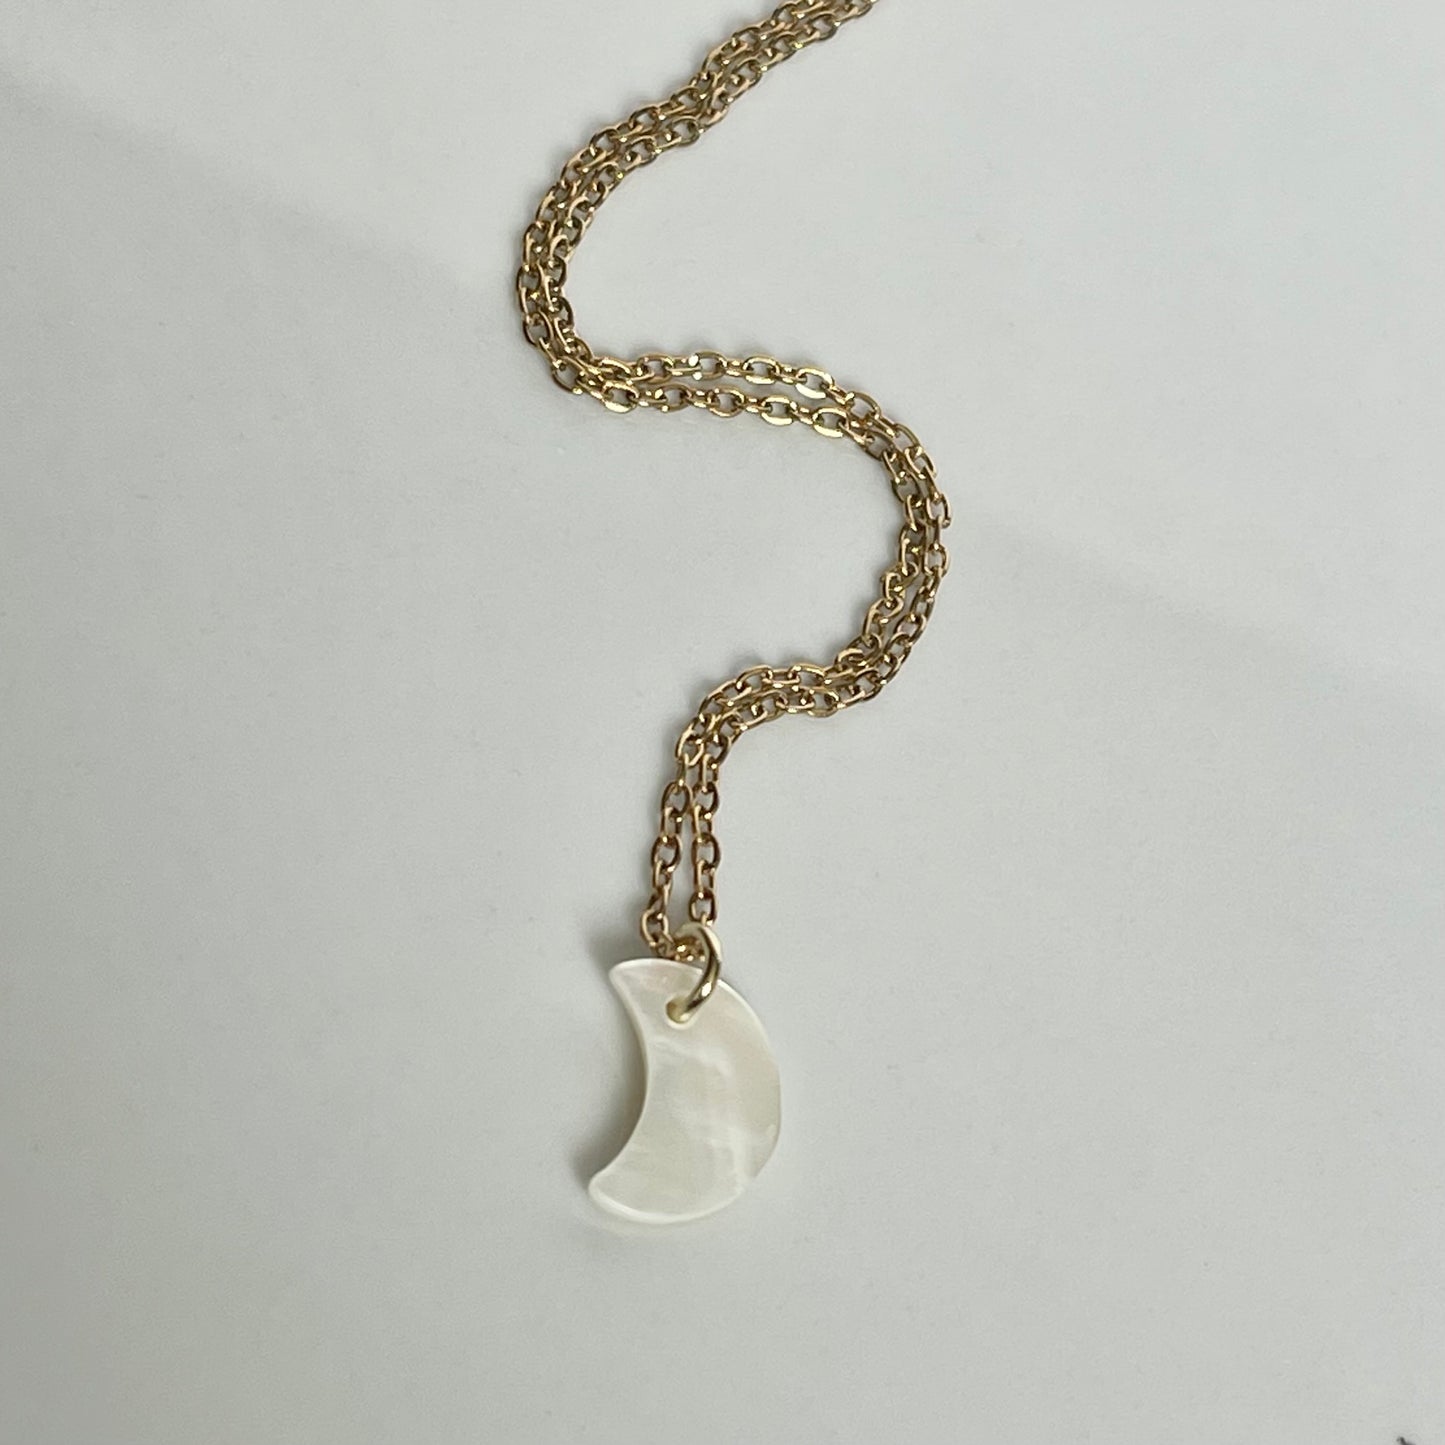 Stay Wild Moon Child. Shell Moon Necklace